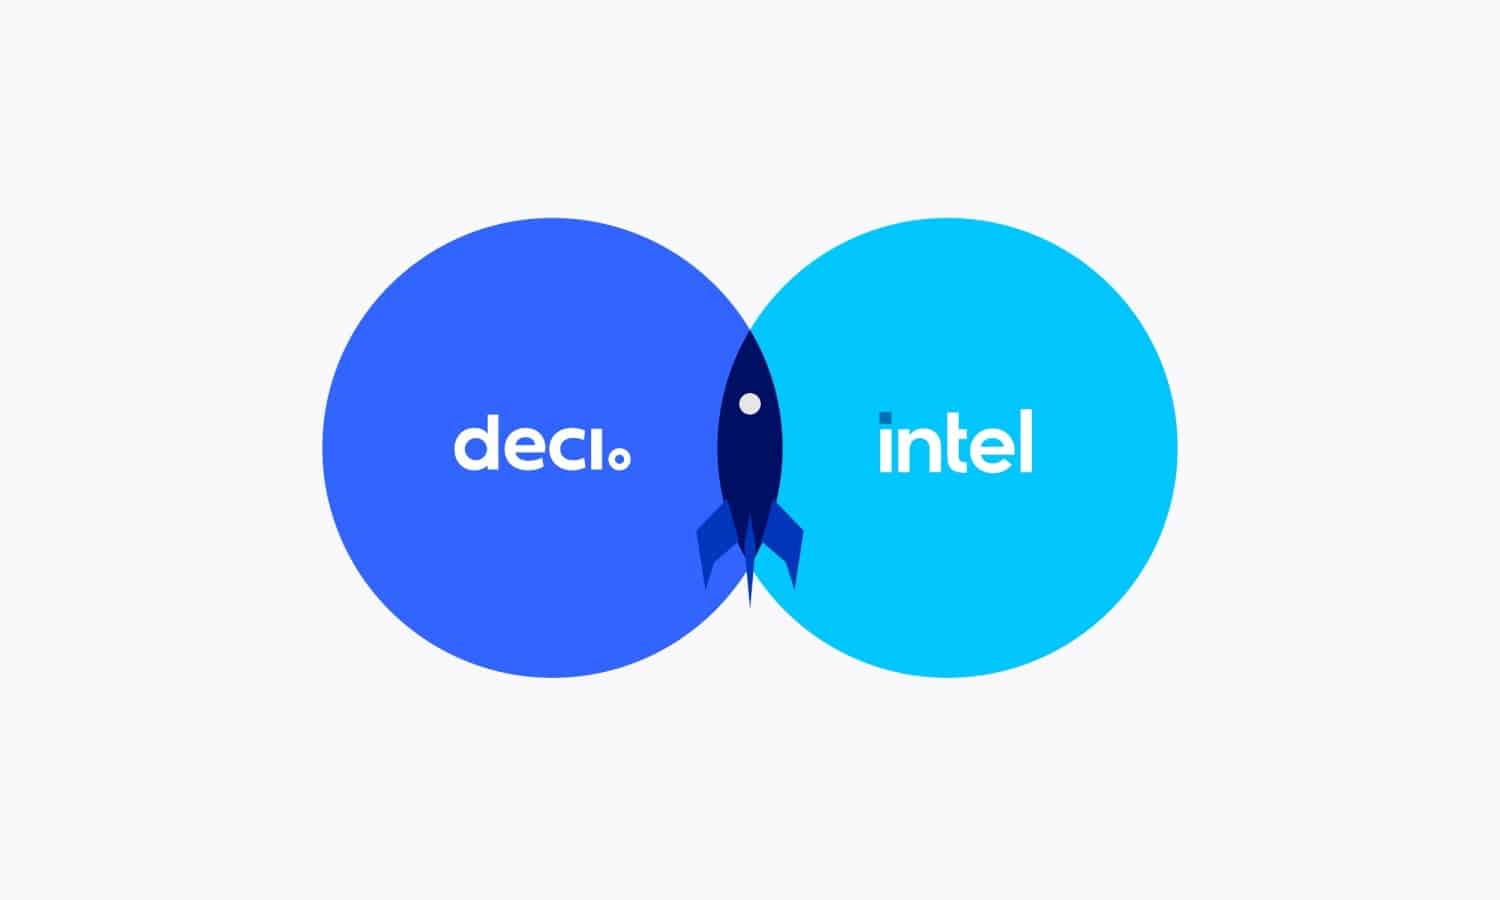 deci and intel blog images